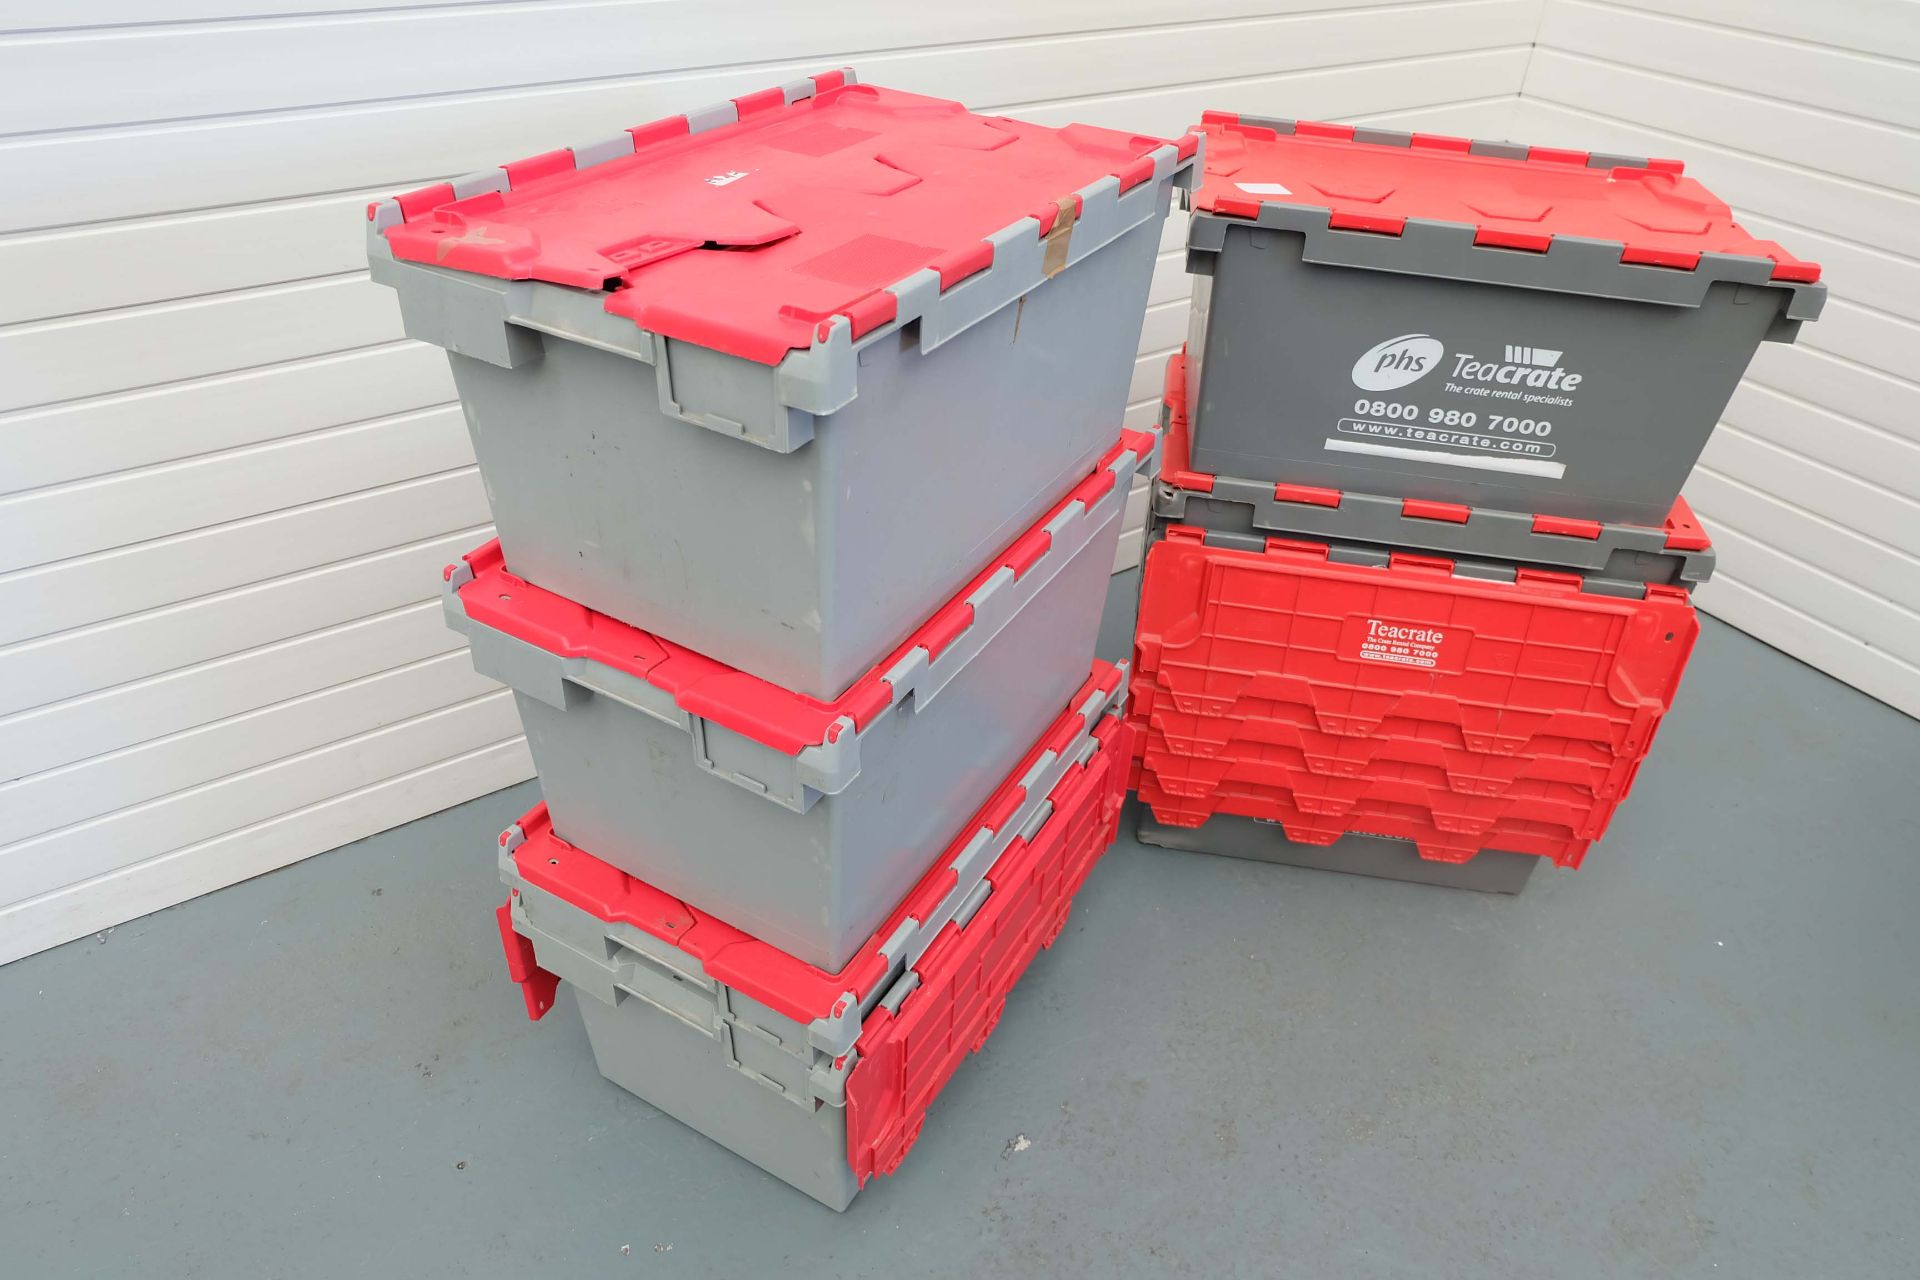 10 x PHS Teacrate. Type LC3B Standard Lidded Crate. Volume 80 Litres. - Image 2 of 6